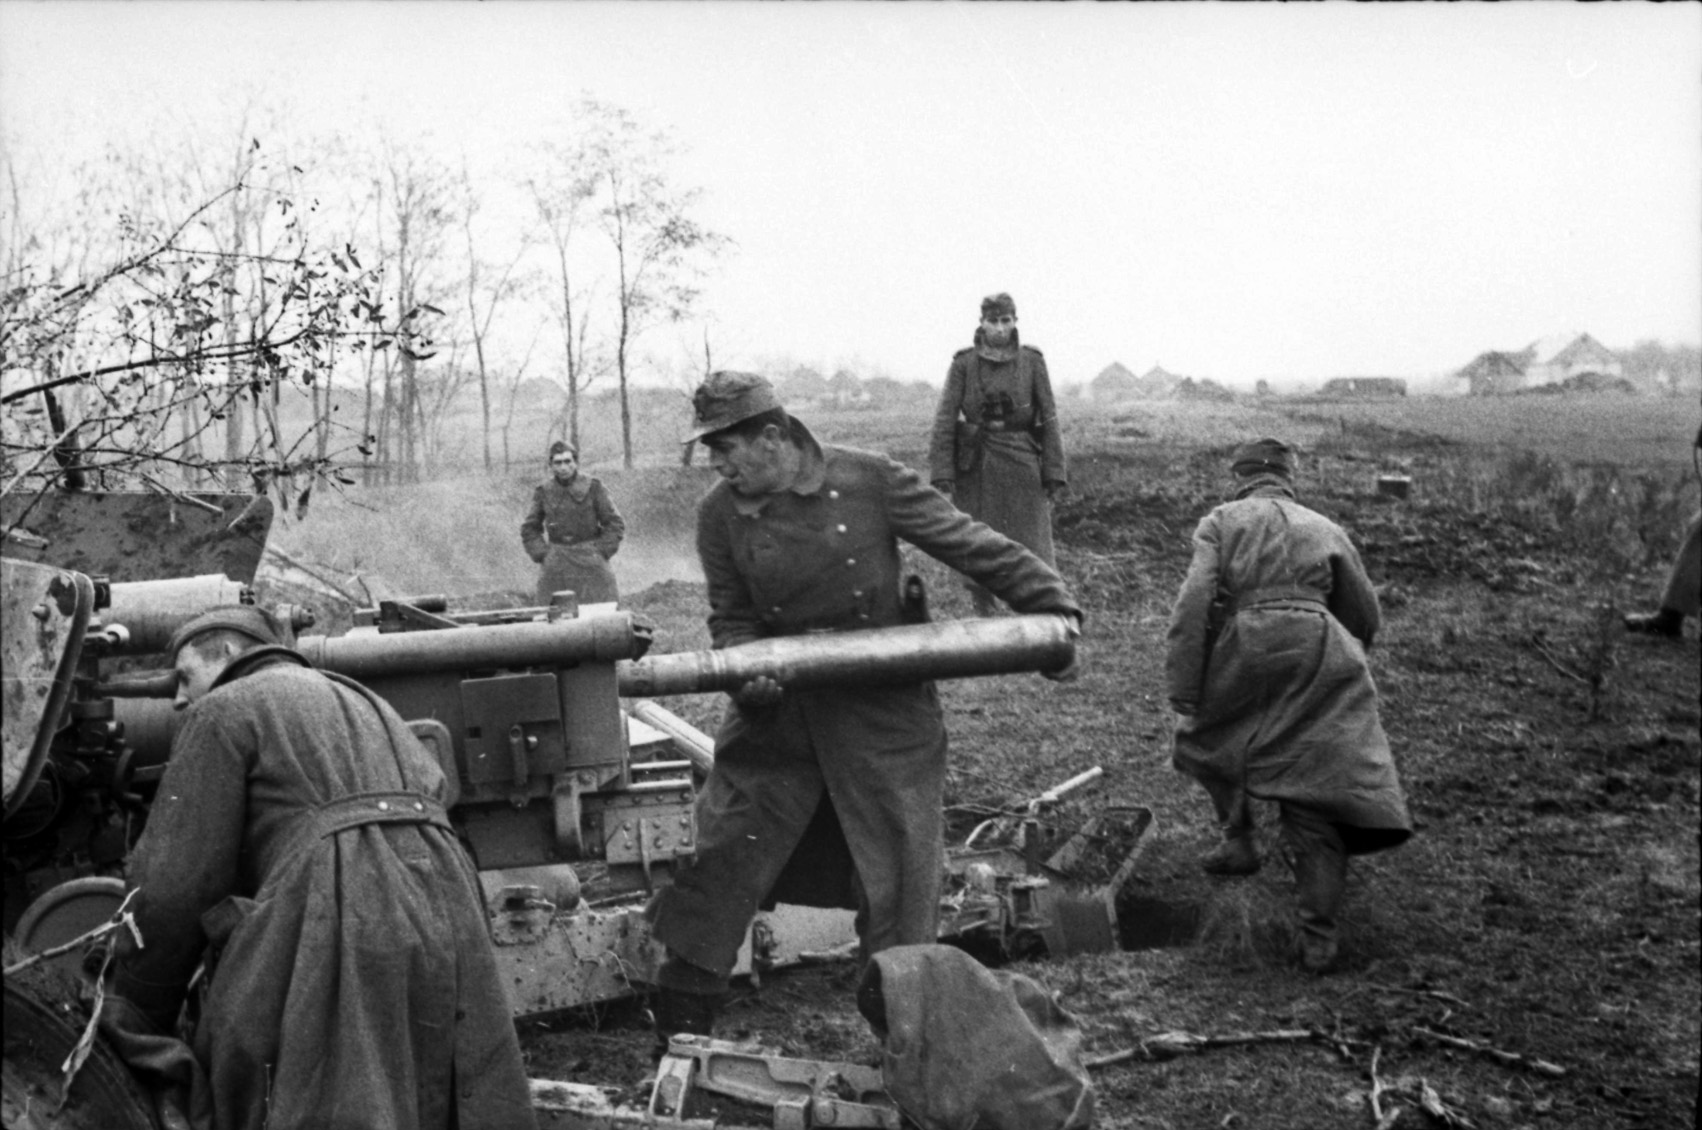 Defending their position in southern Ukraine in December 1943, these German soldiers are loading a heavy artillery piece. German efforts to take Kiev at the end of 1943 were thwarted by Red Army counterattacks.